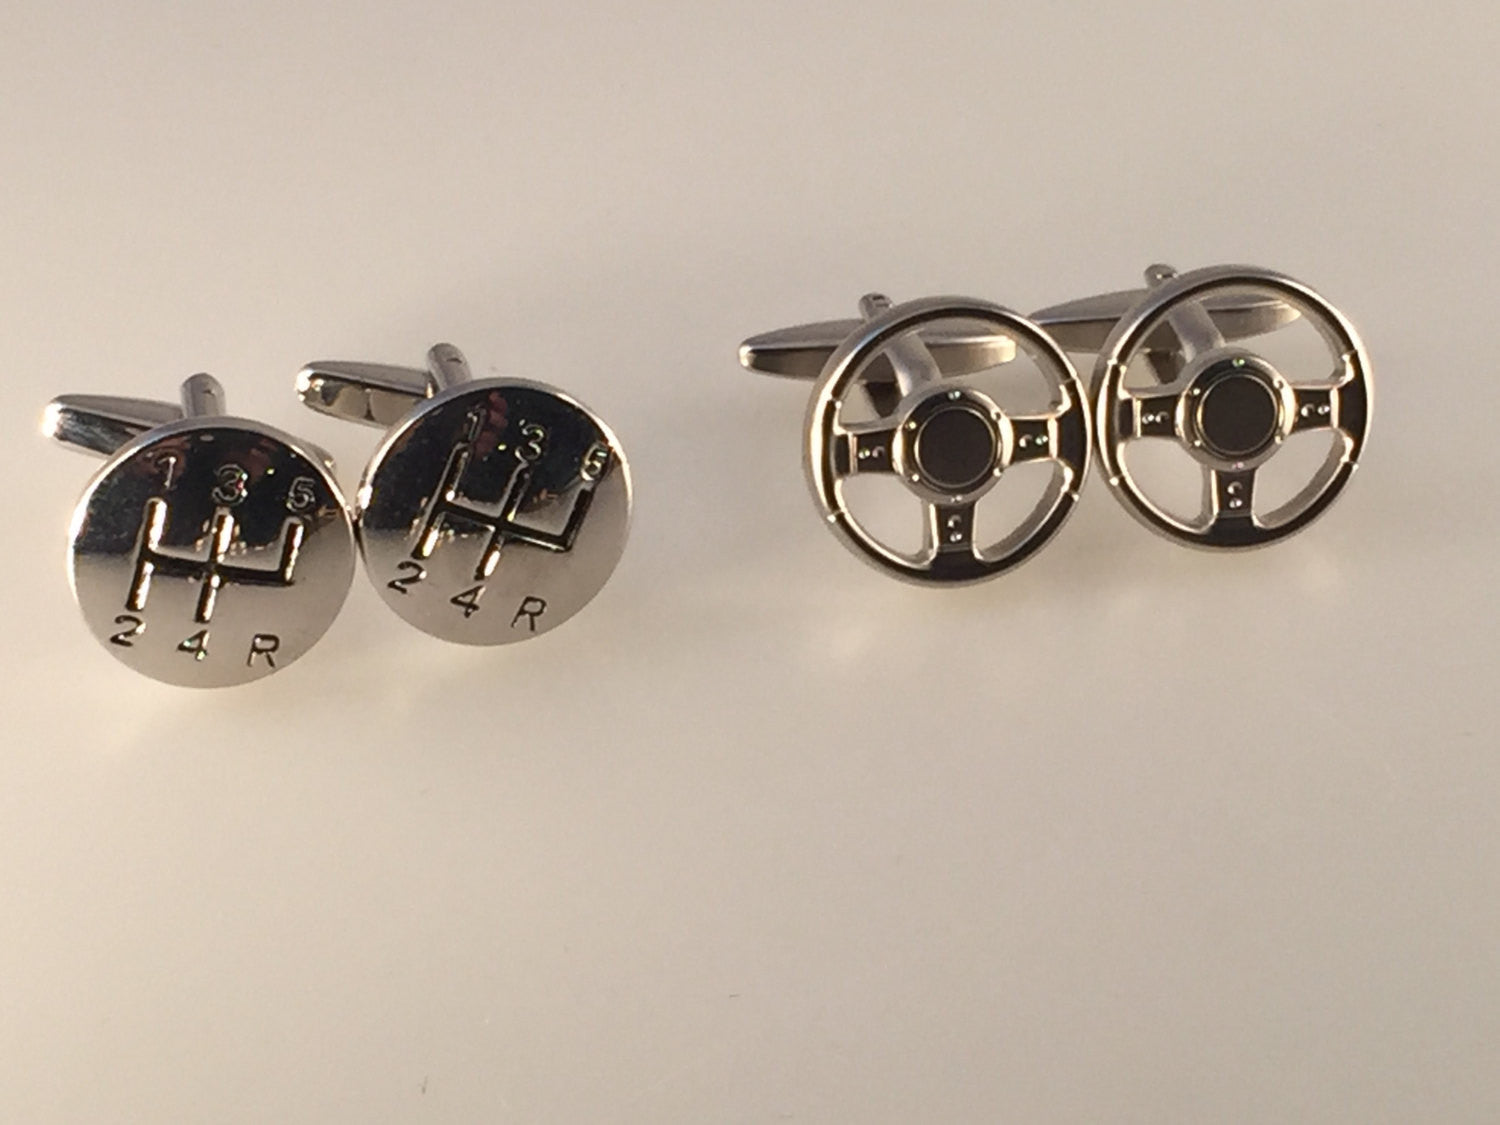 Steering Wheel and Gear Shift Cufflinks, Driving Cuff Links, Car Cuff Links, Men's Cuff Links, Wedding Cuff Links, Father's Day